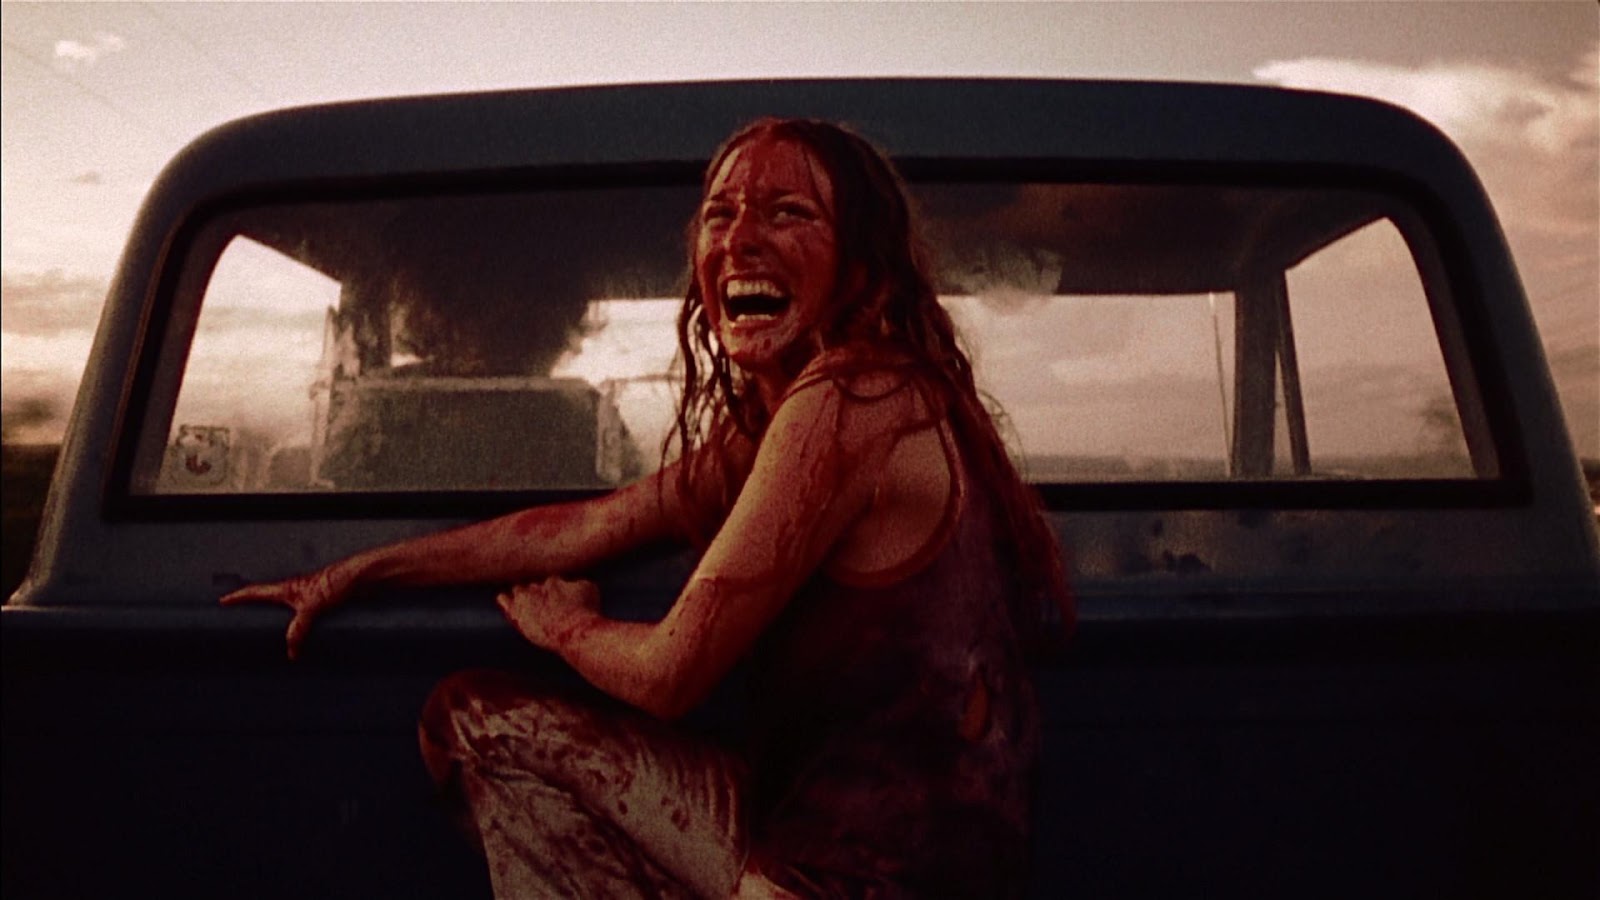 Sally in The Texas Chain Saw Massacre